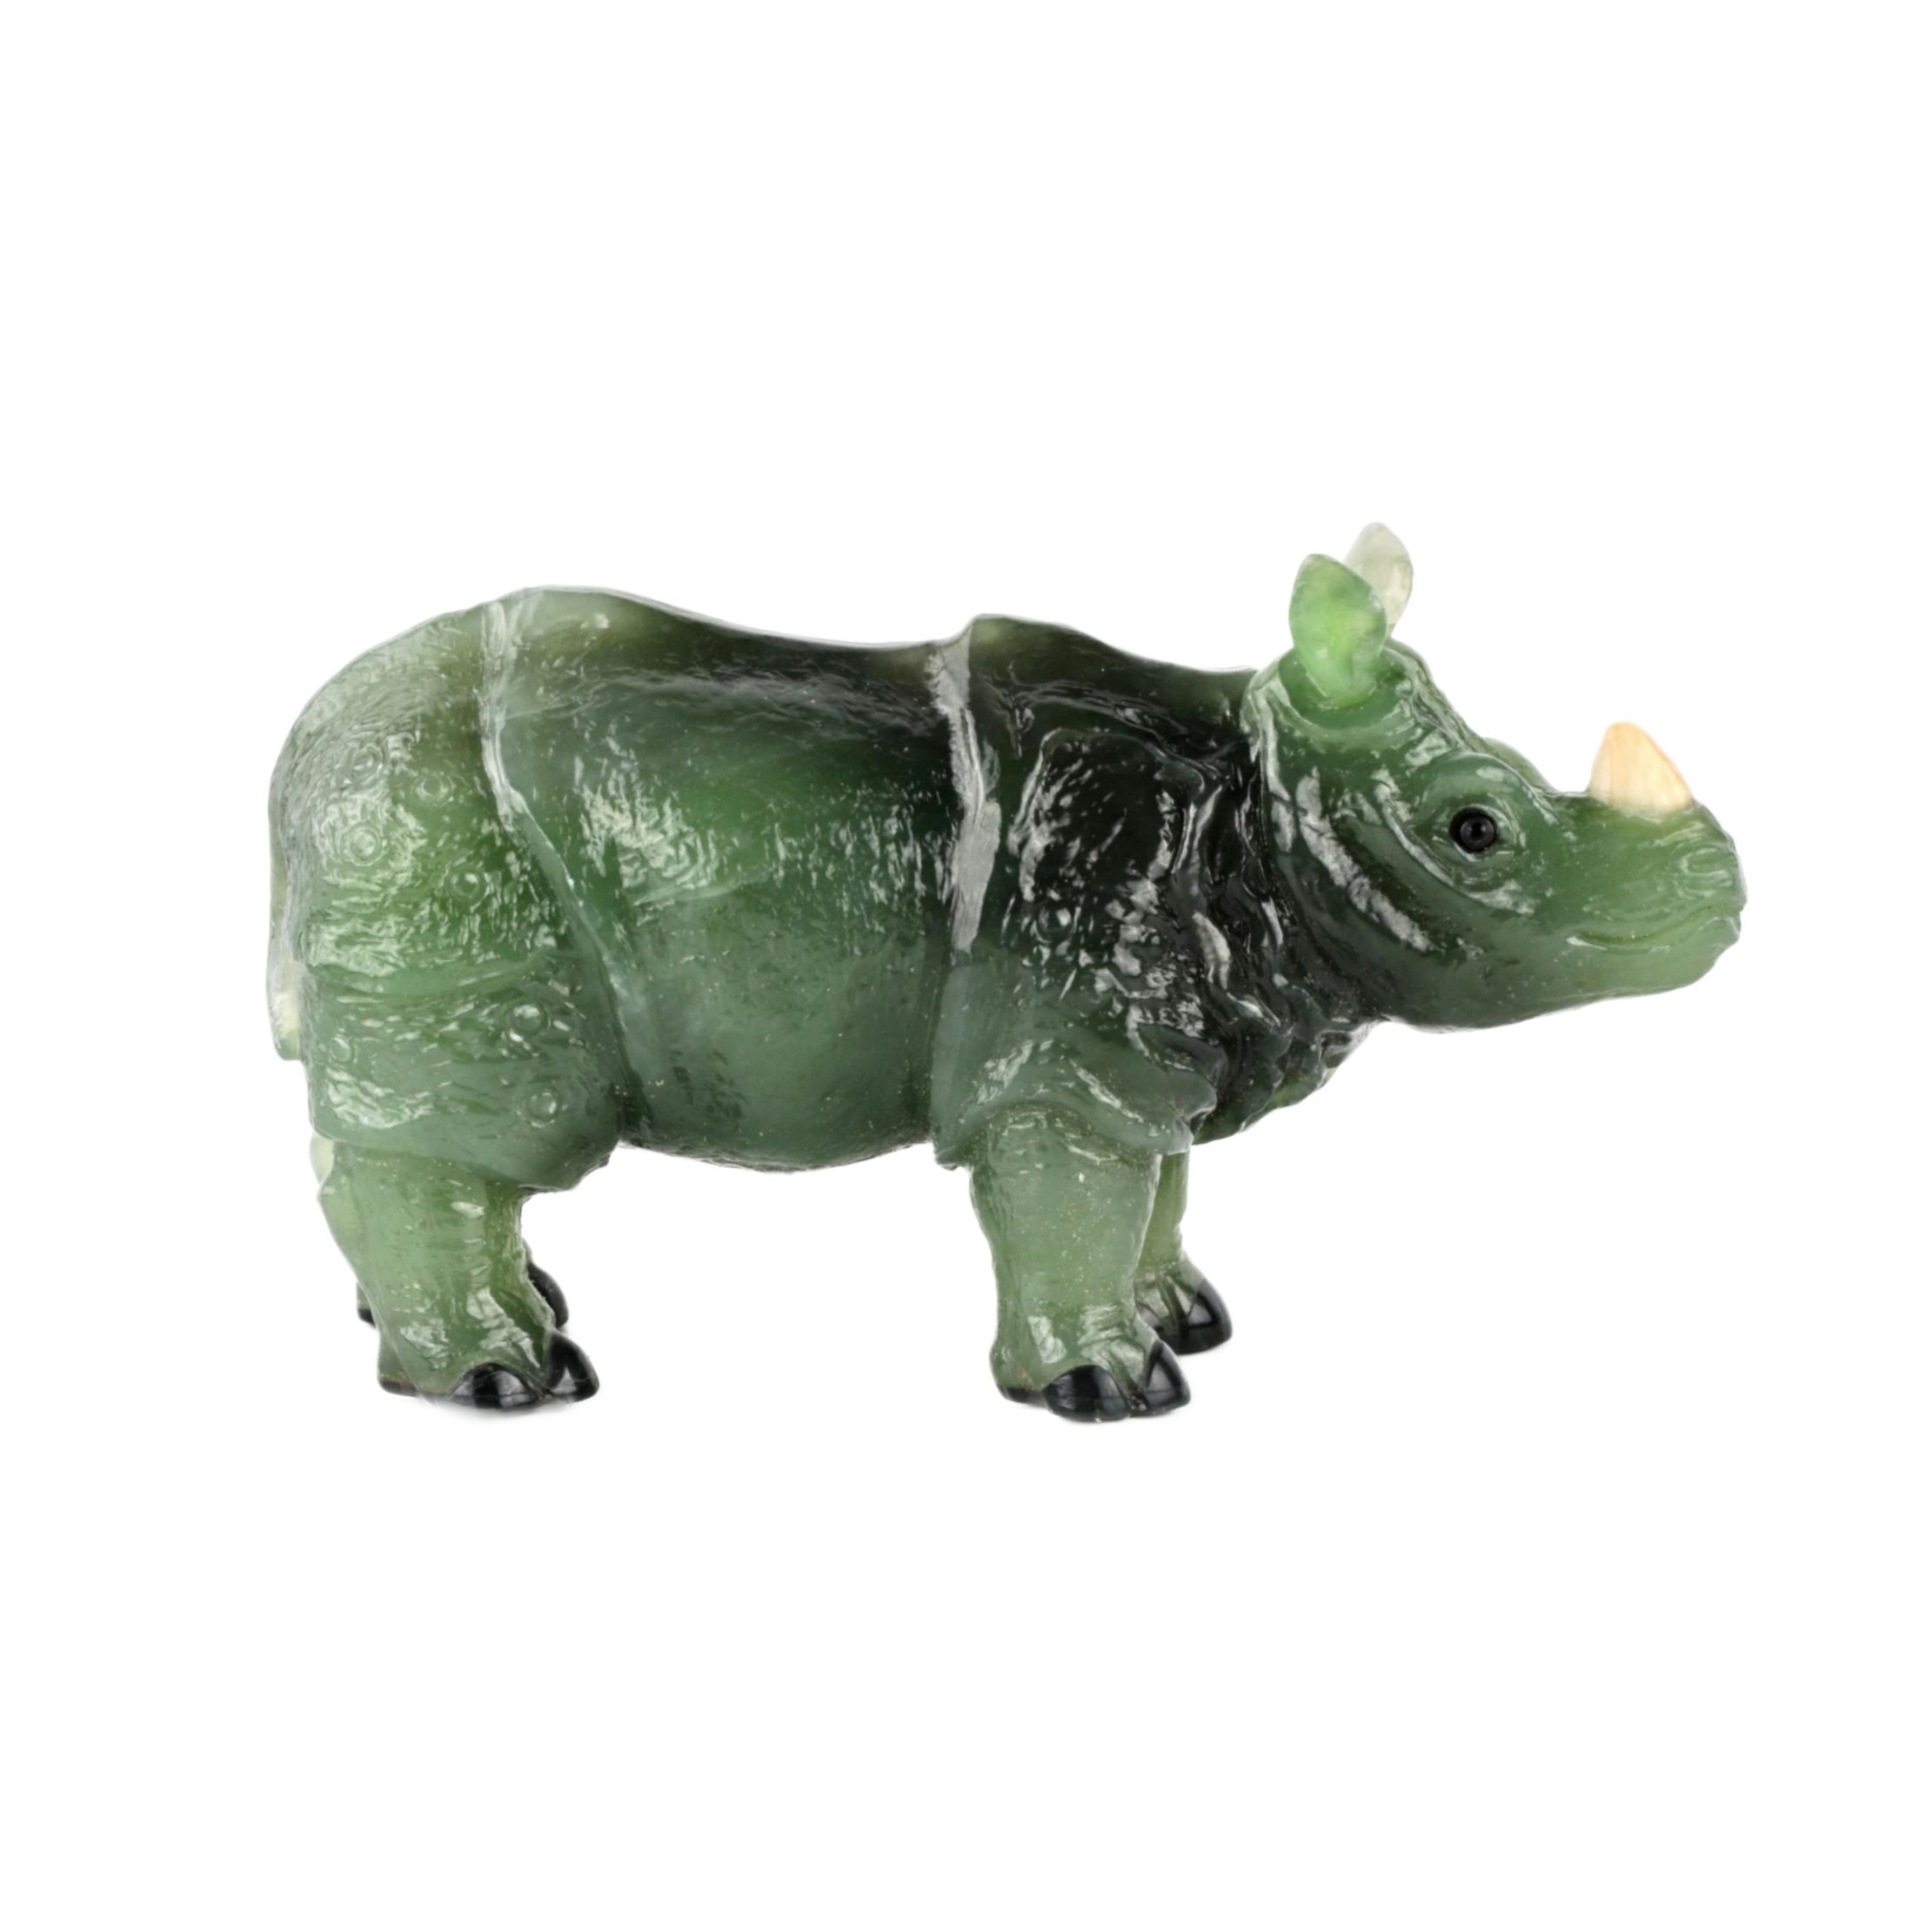 Stone-cutting miniature Jade rhinoceros in the style of products from the Faberge firm - Image 2 of 5